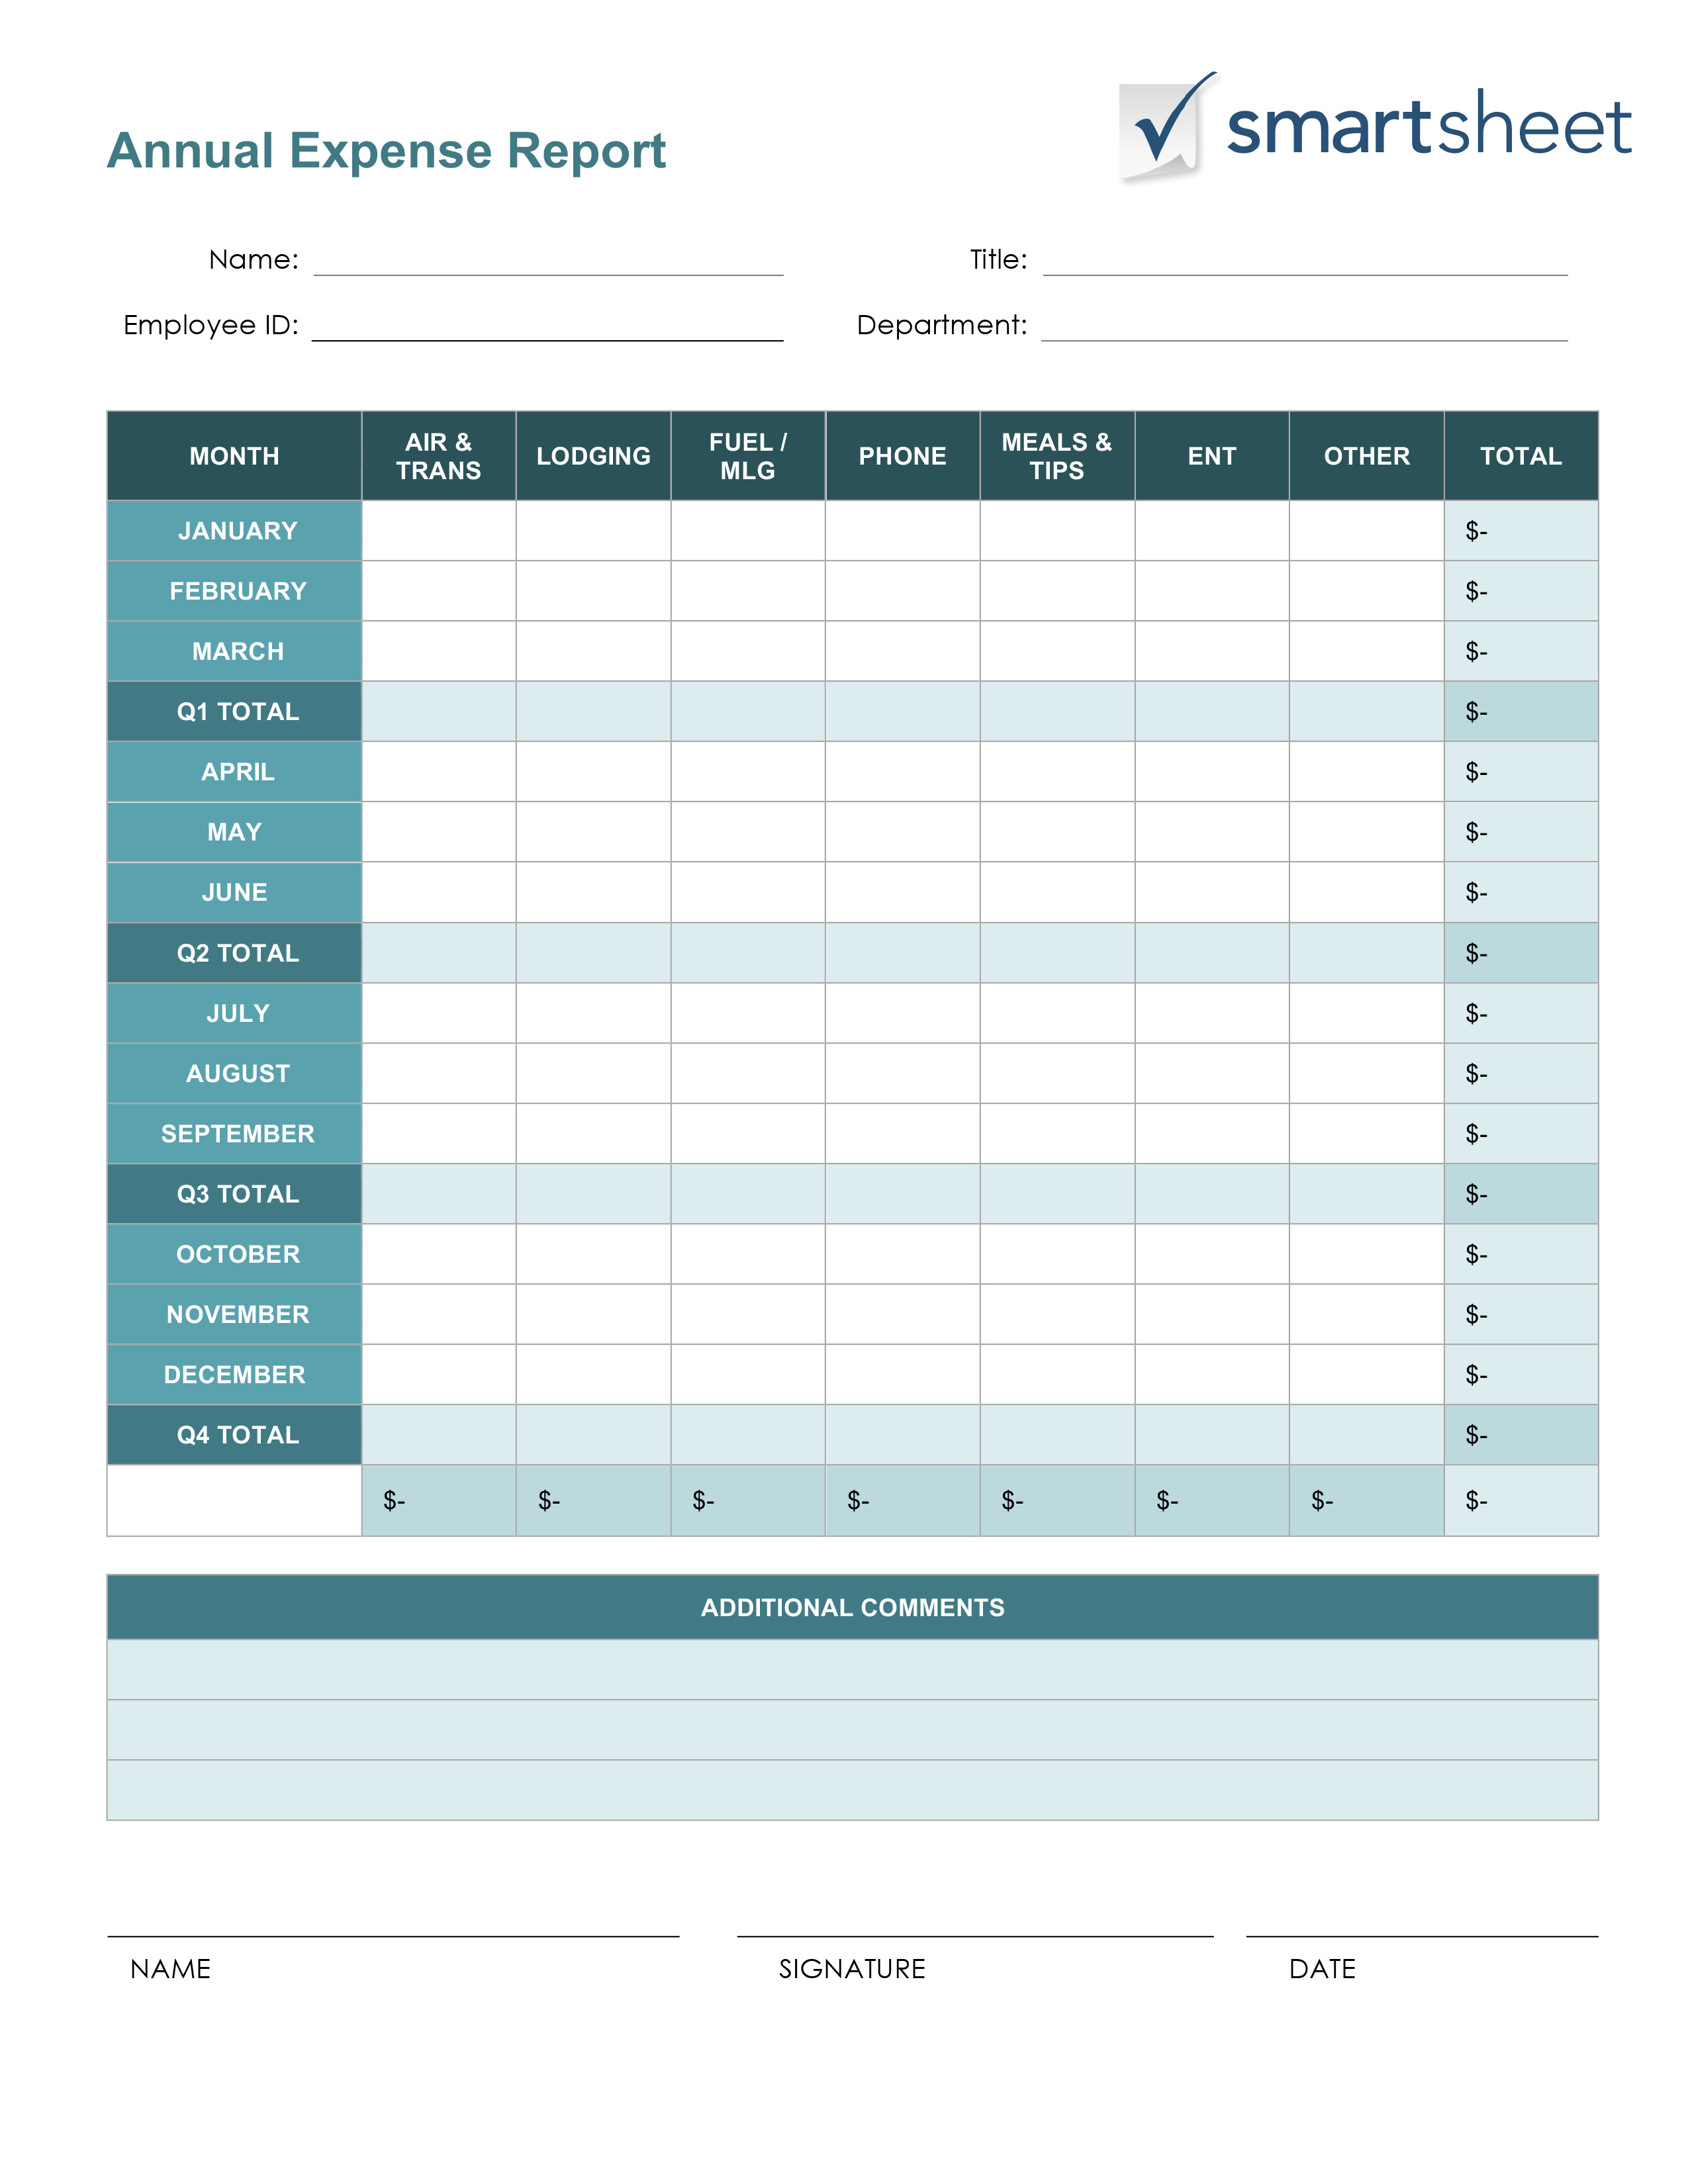 Free Expense Report Templates Smartsheet With Business Expense Report Template Free